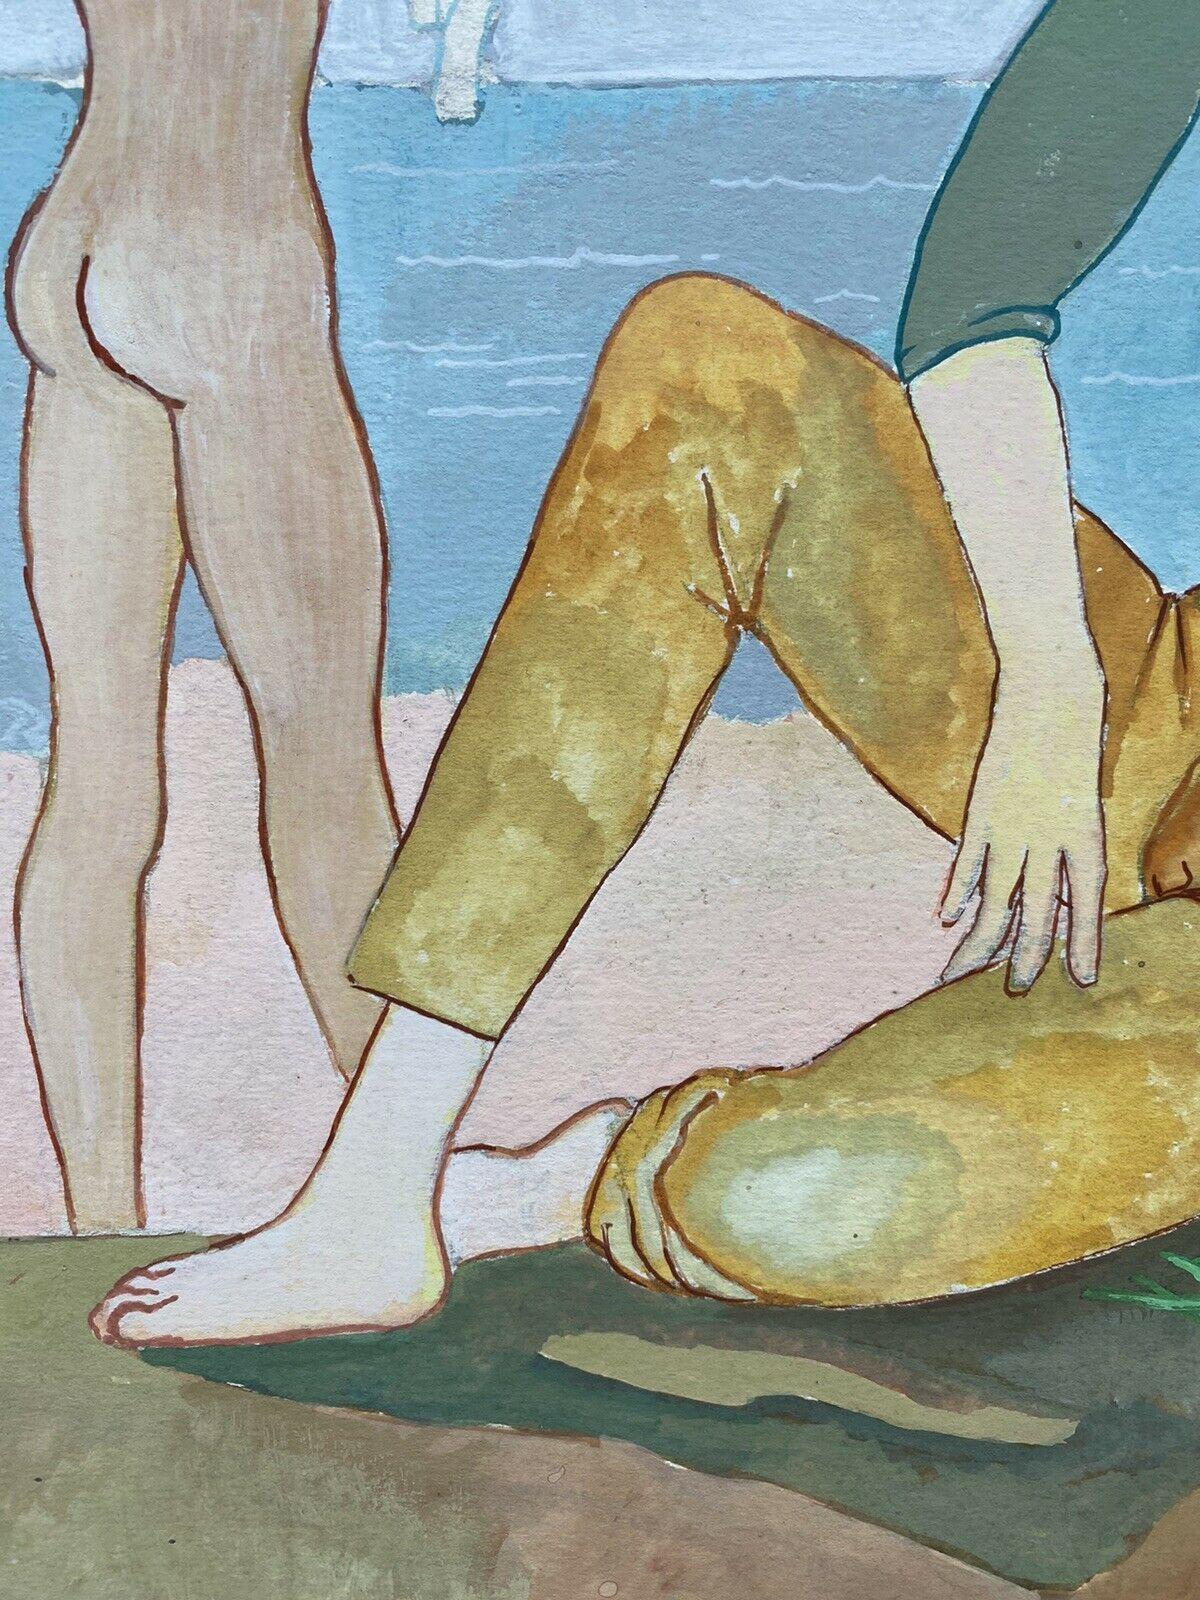 20th CENTURY FRENCH MODERNIST PAINTING - BATHERS ON THE BEACH 1